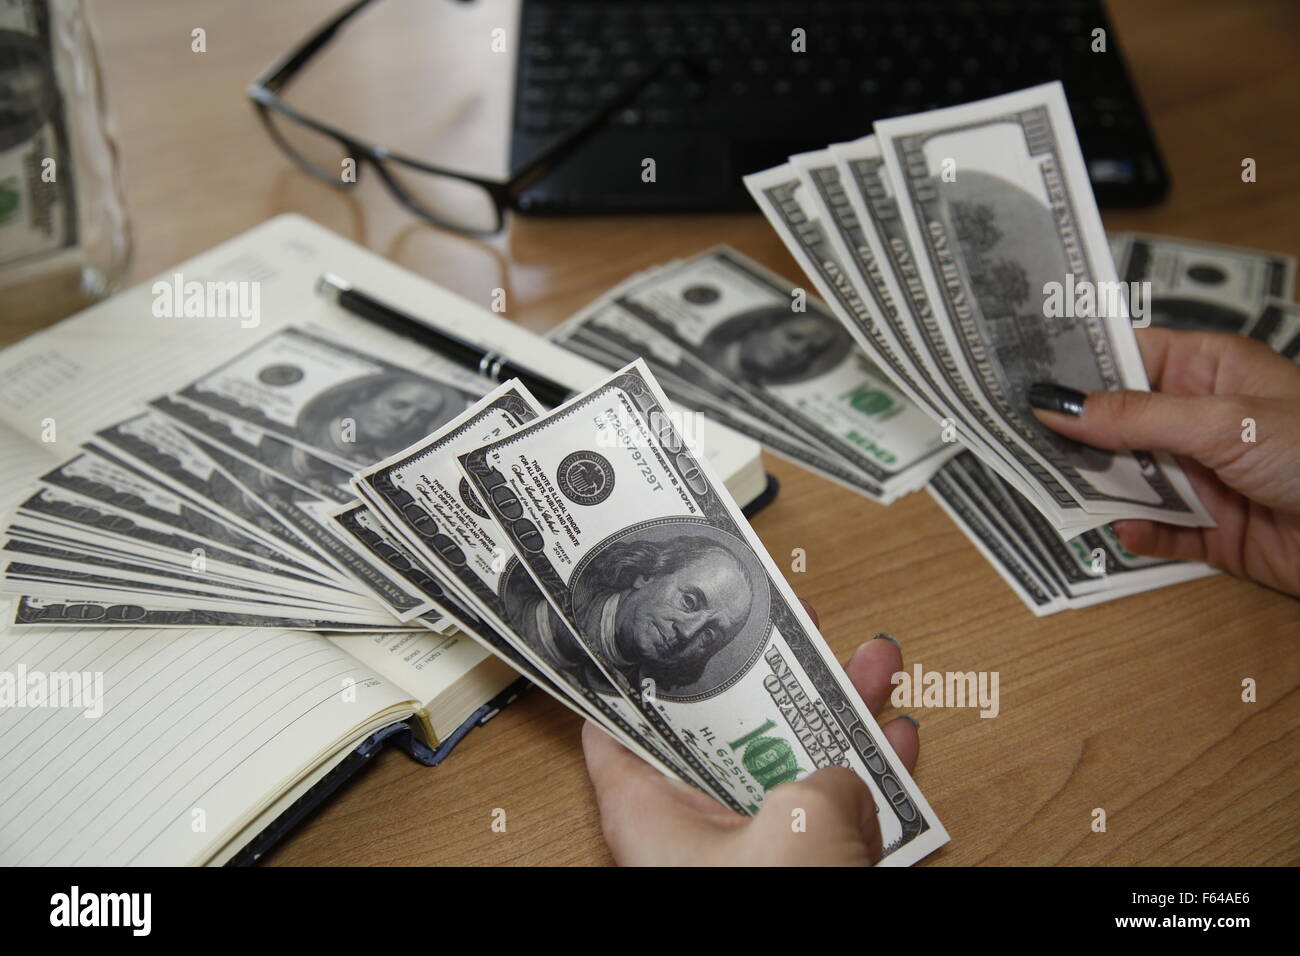 calculating home finances and domestic budget at table Stock Photo